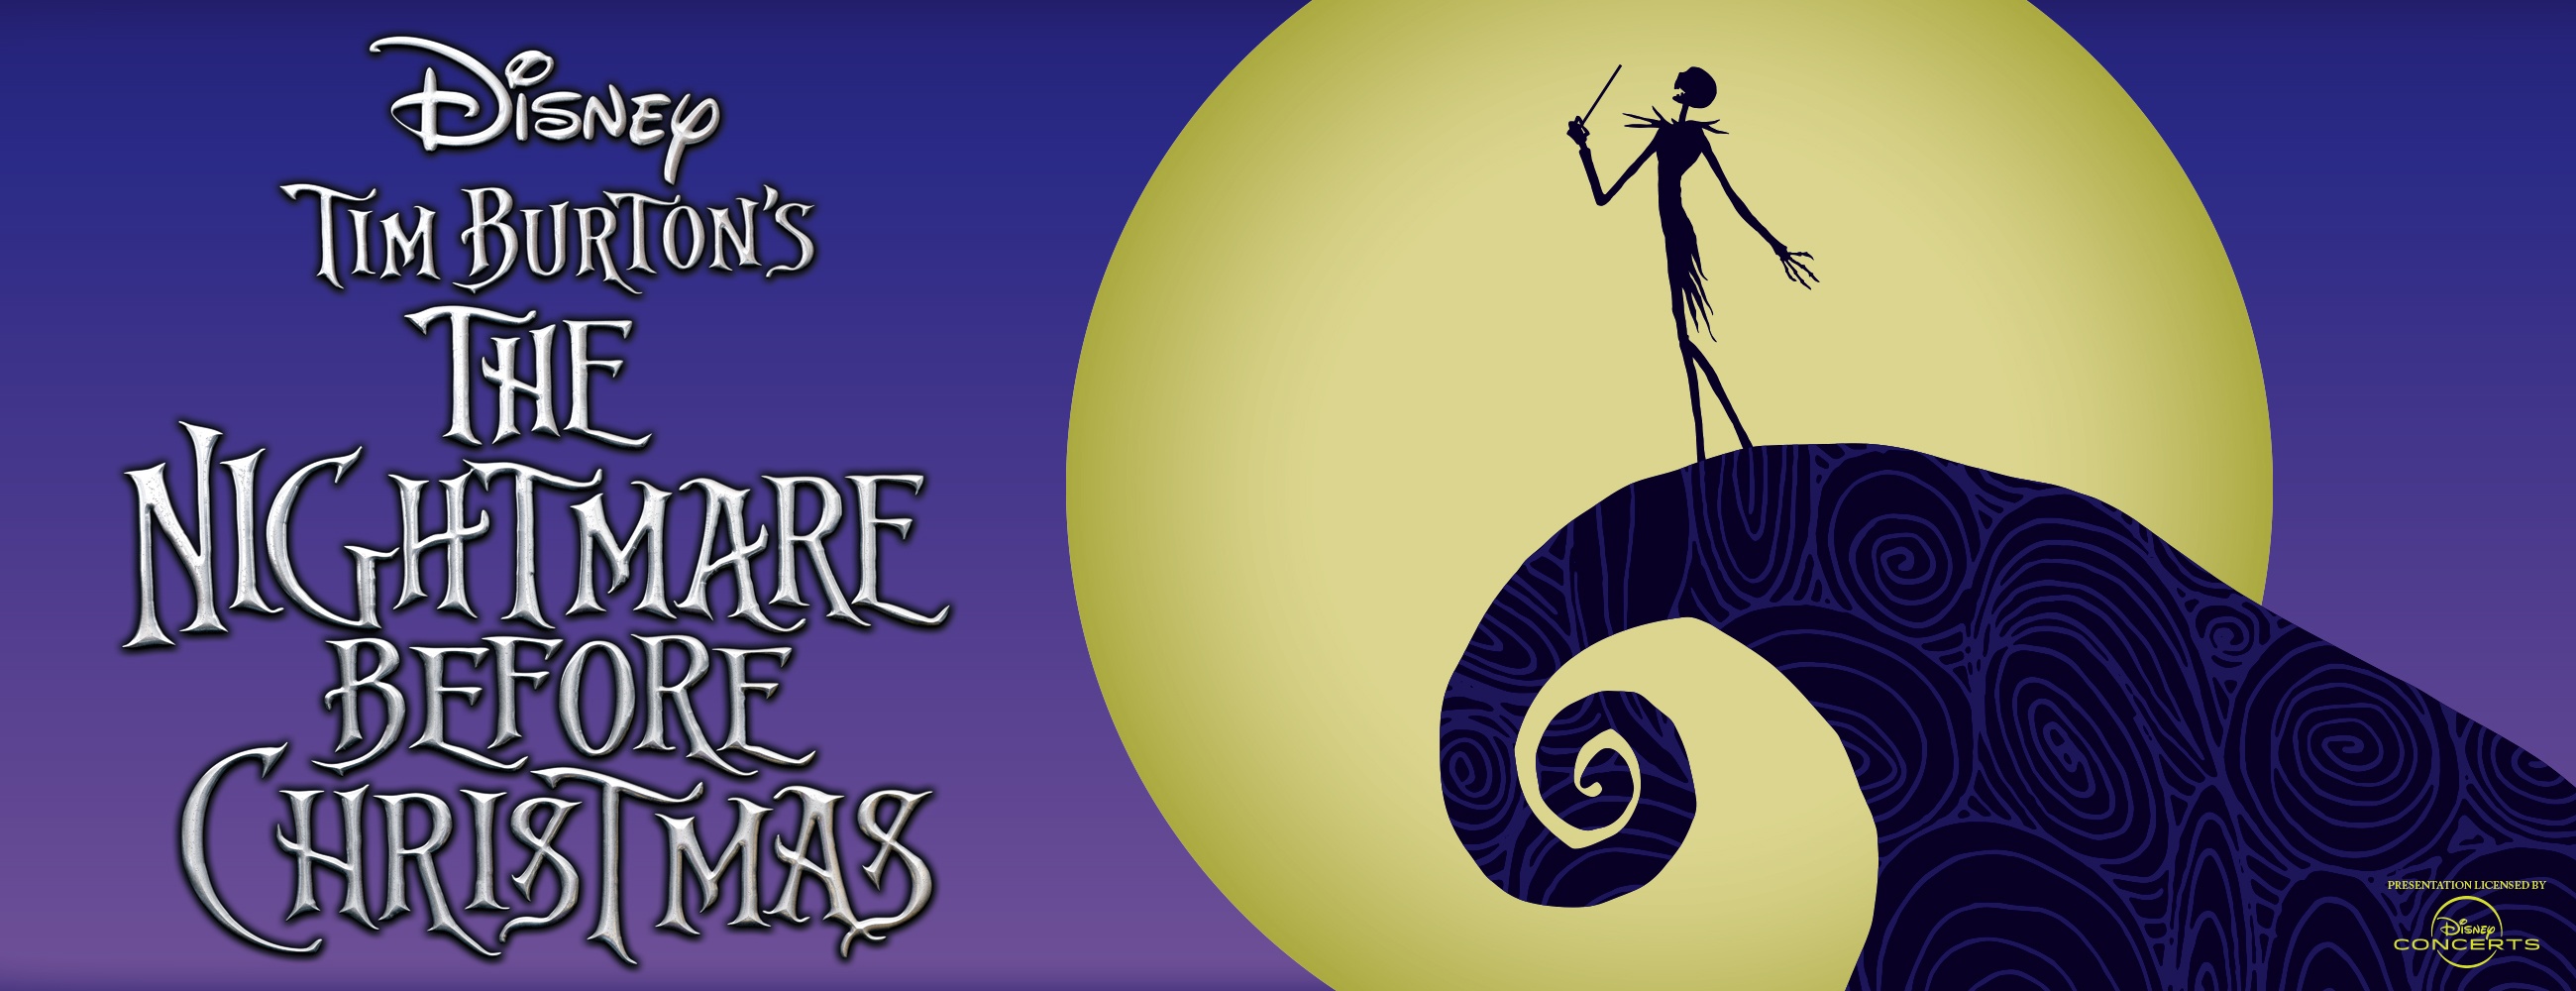 The Nightmare Before Christmas: A Closer Look